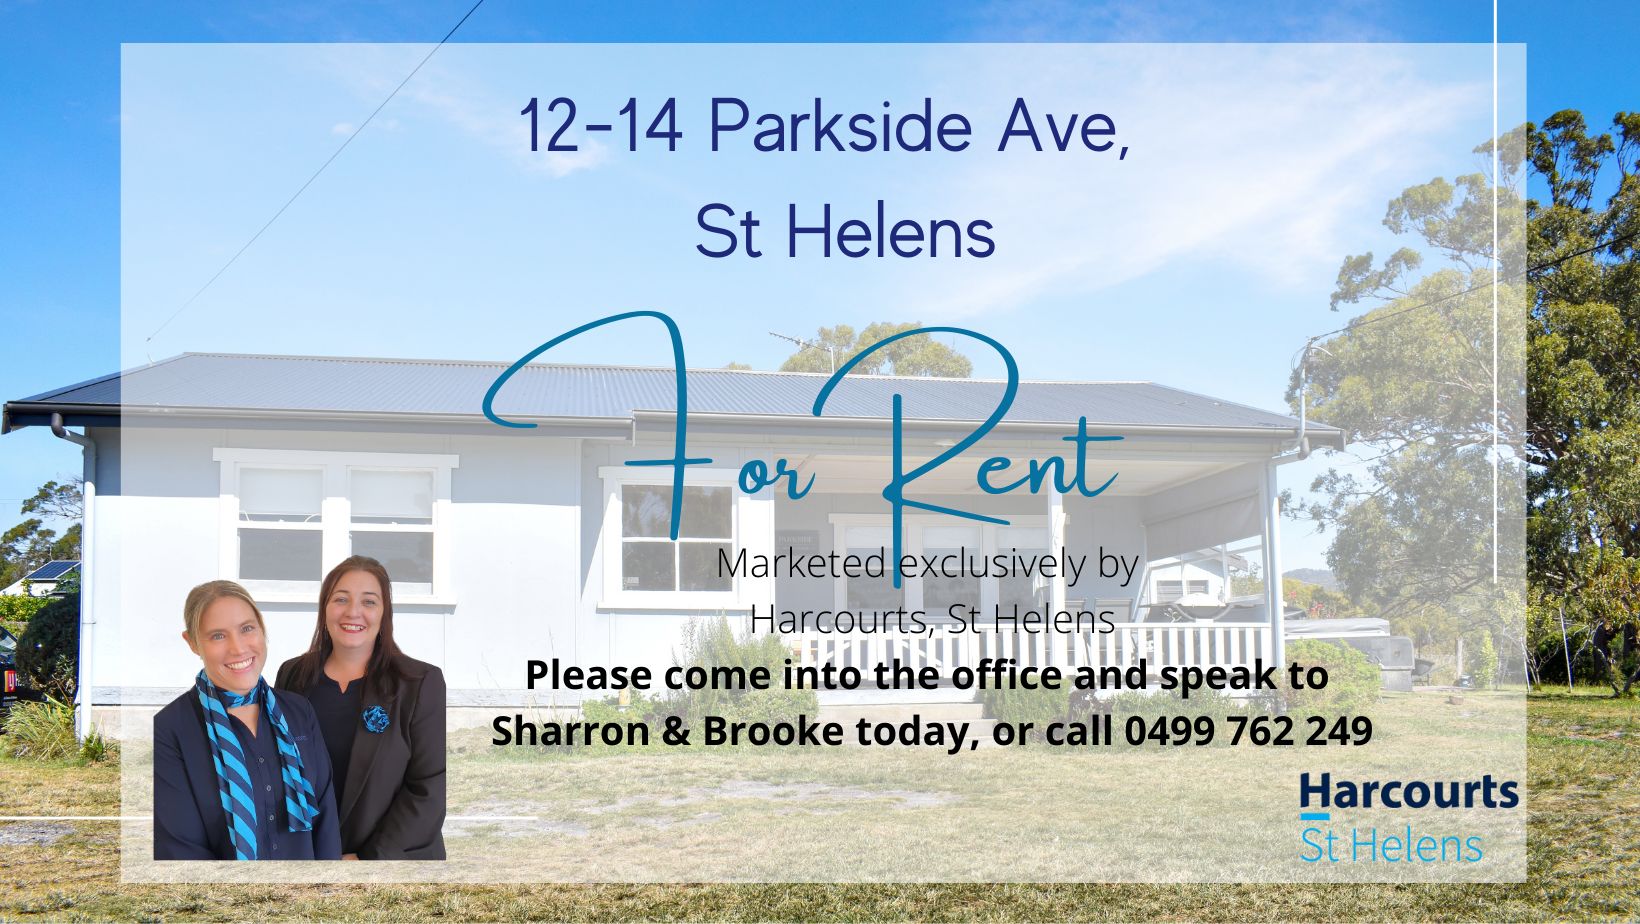 3 bedrooms House in 12-14 Parkside Ave ST HELENS TAS, 7216